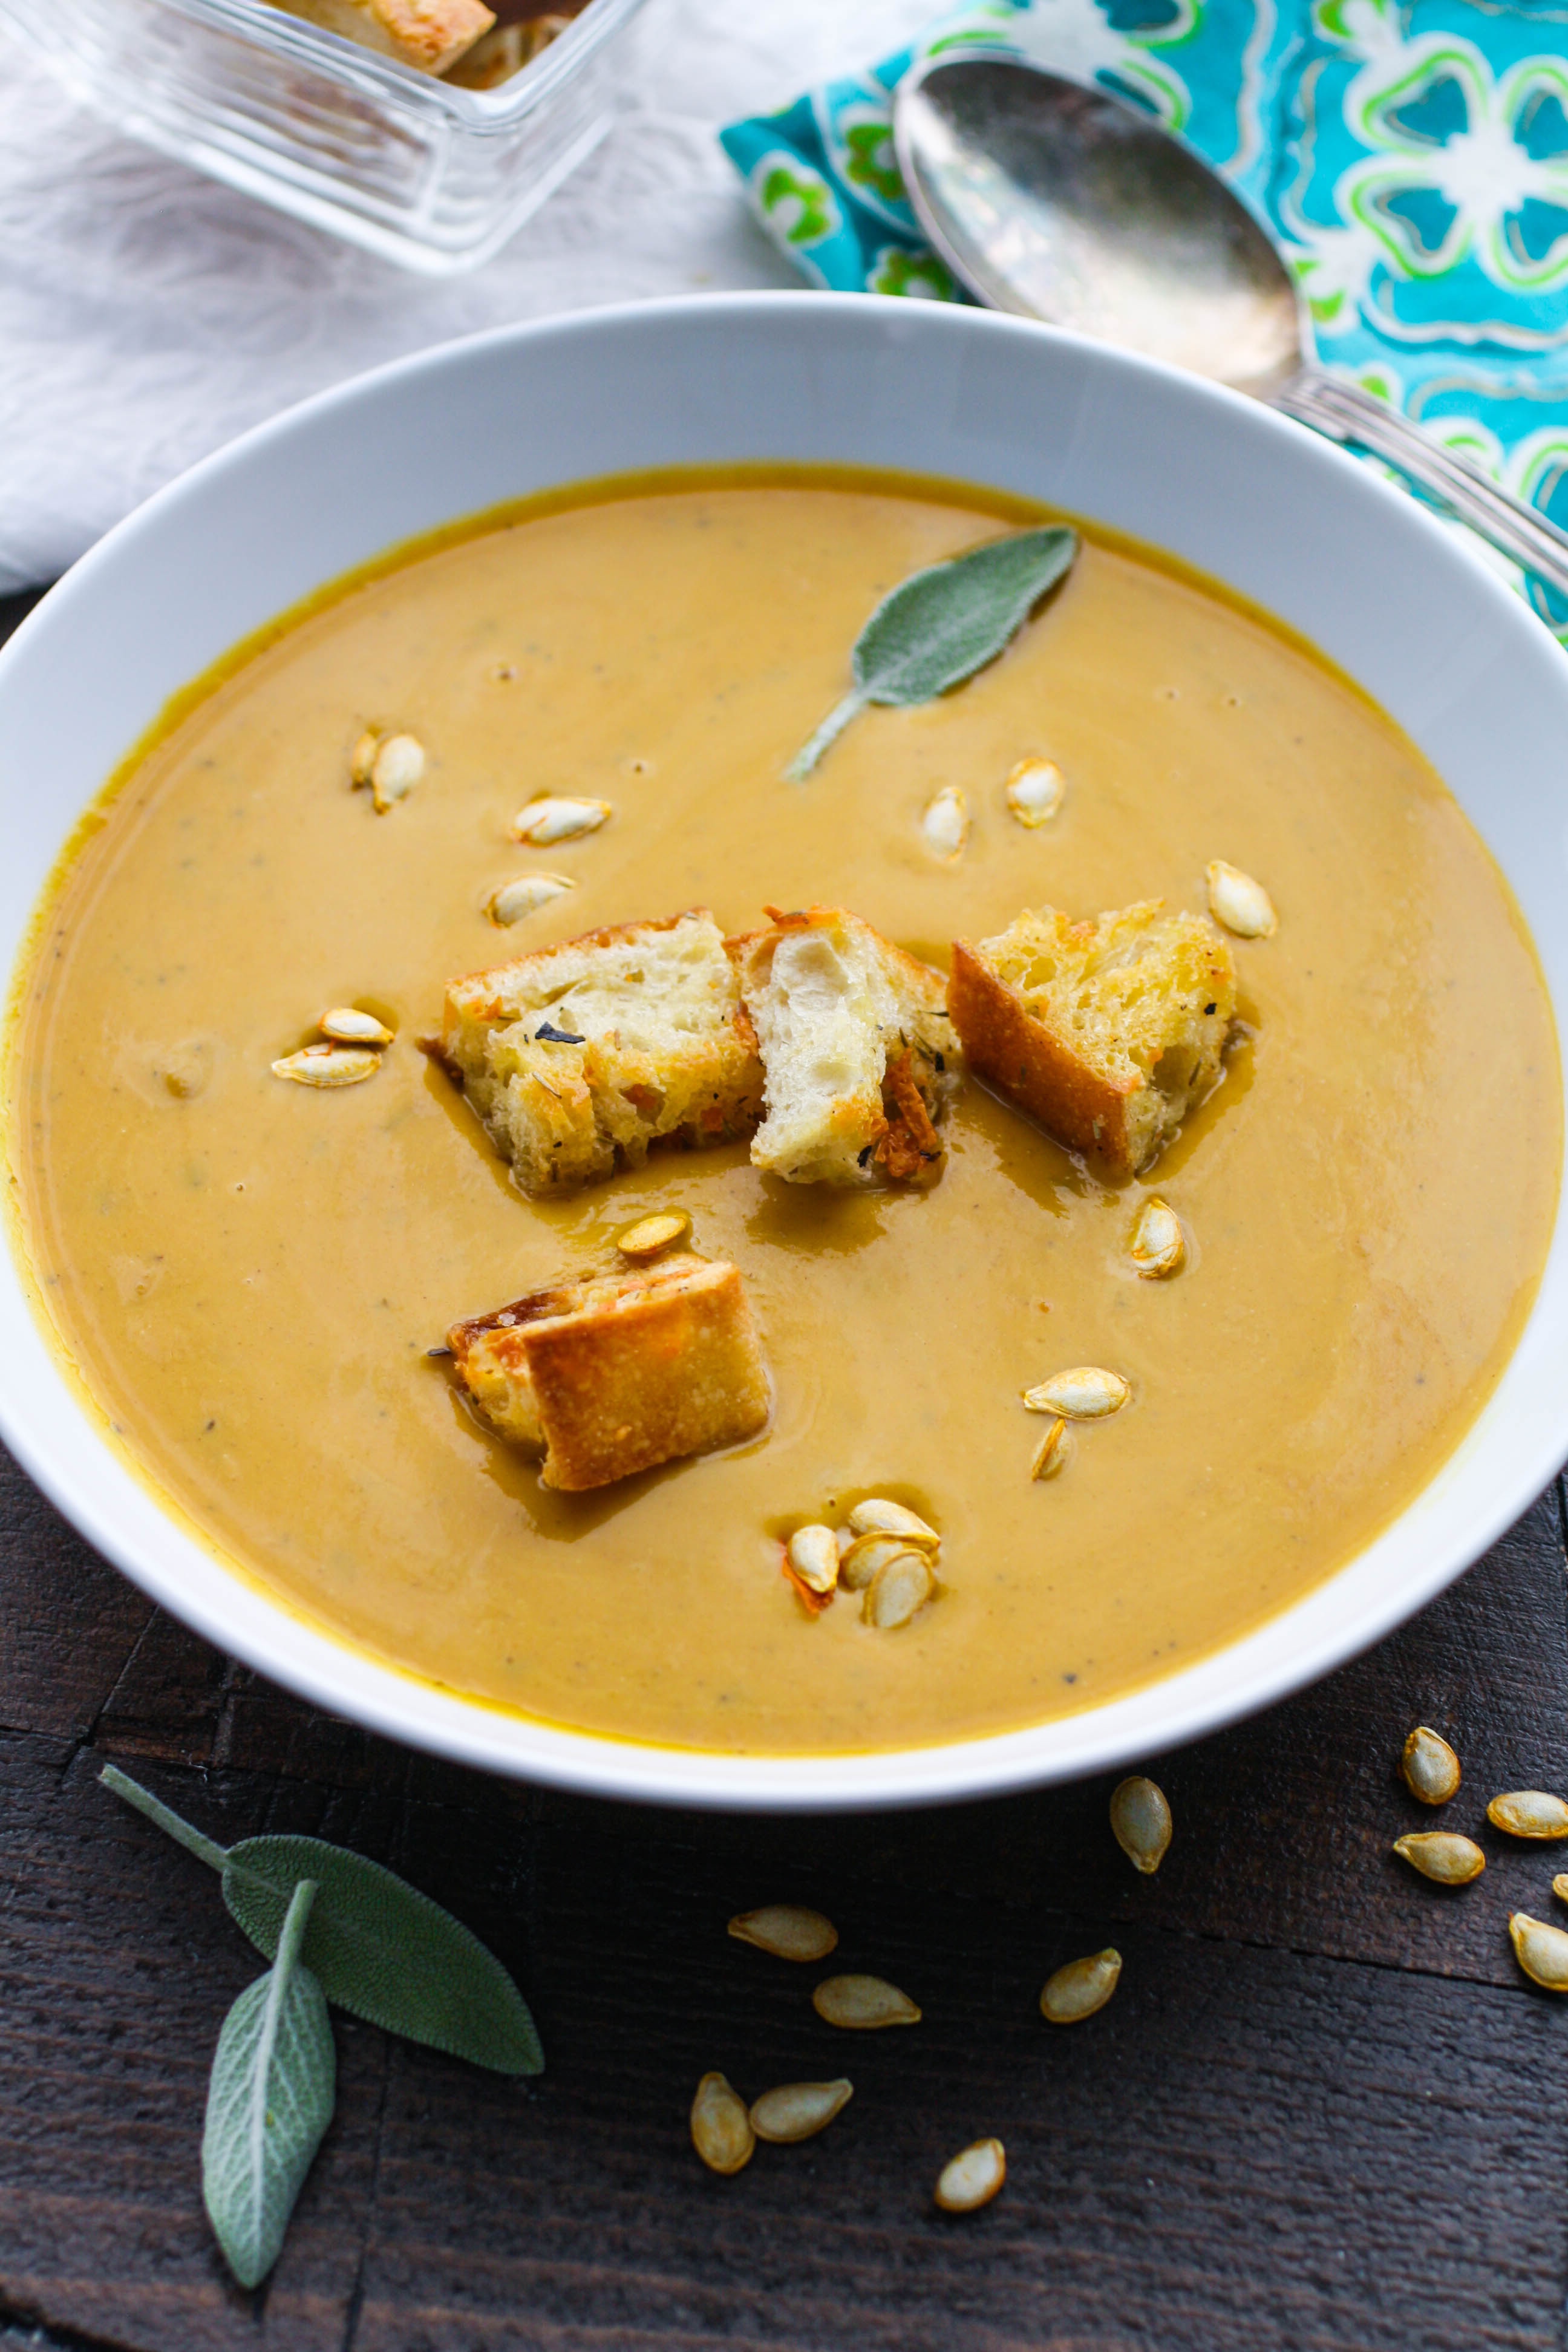 Easy, Creamy Butternut Squash Soup is one you'll want to serve all winter. The colors and flavors of this soup are lovely!